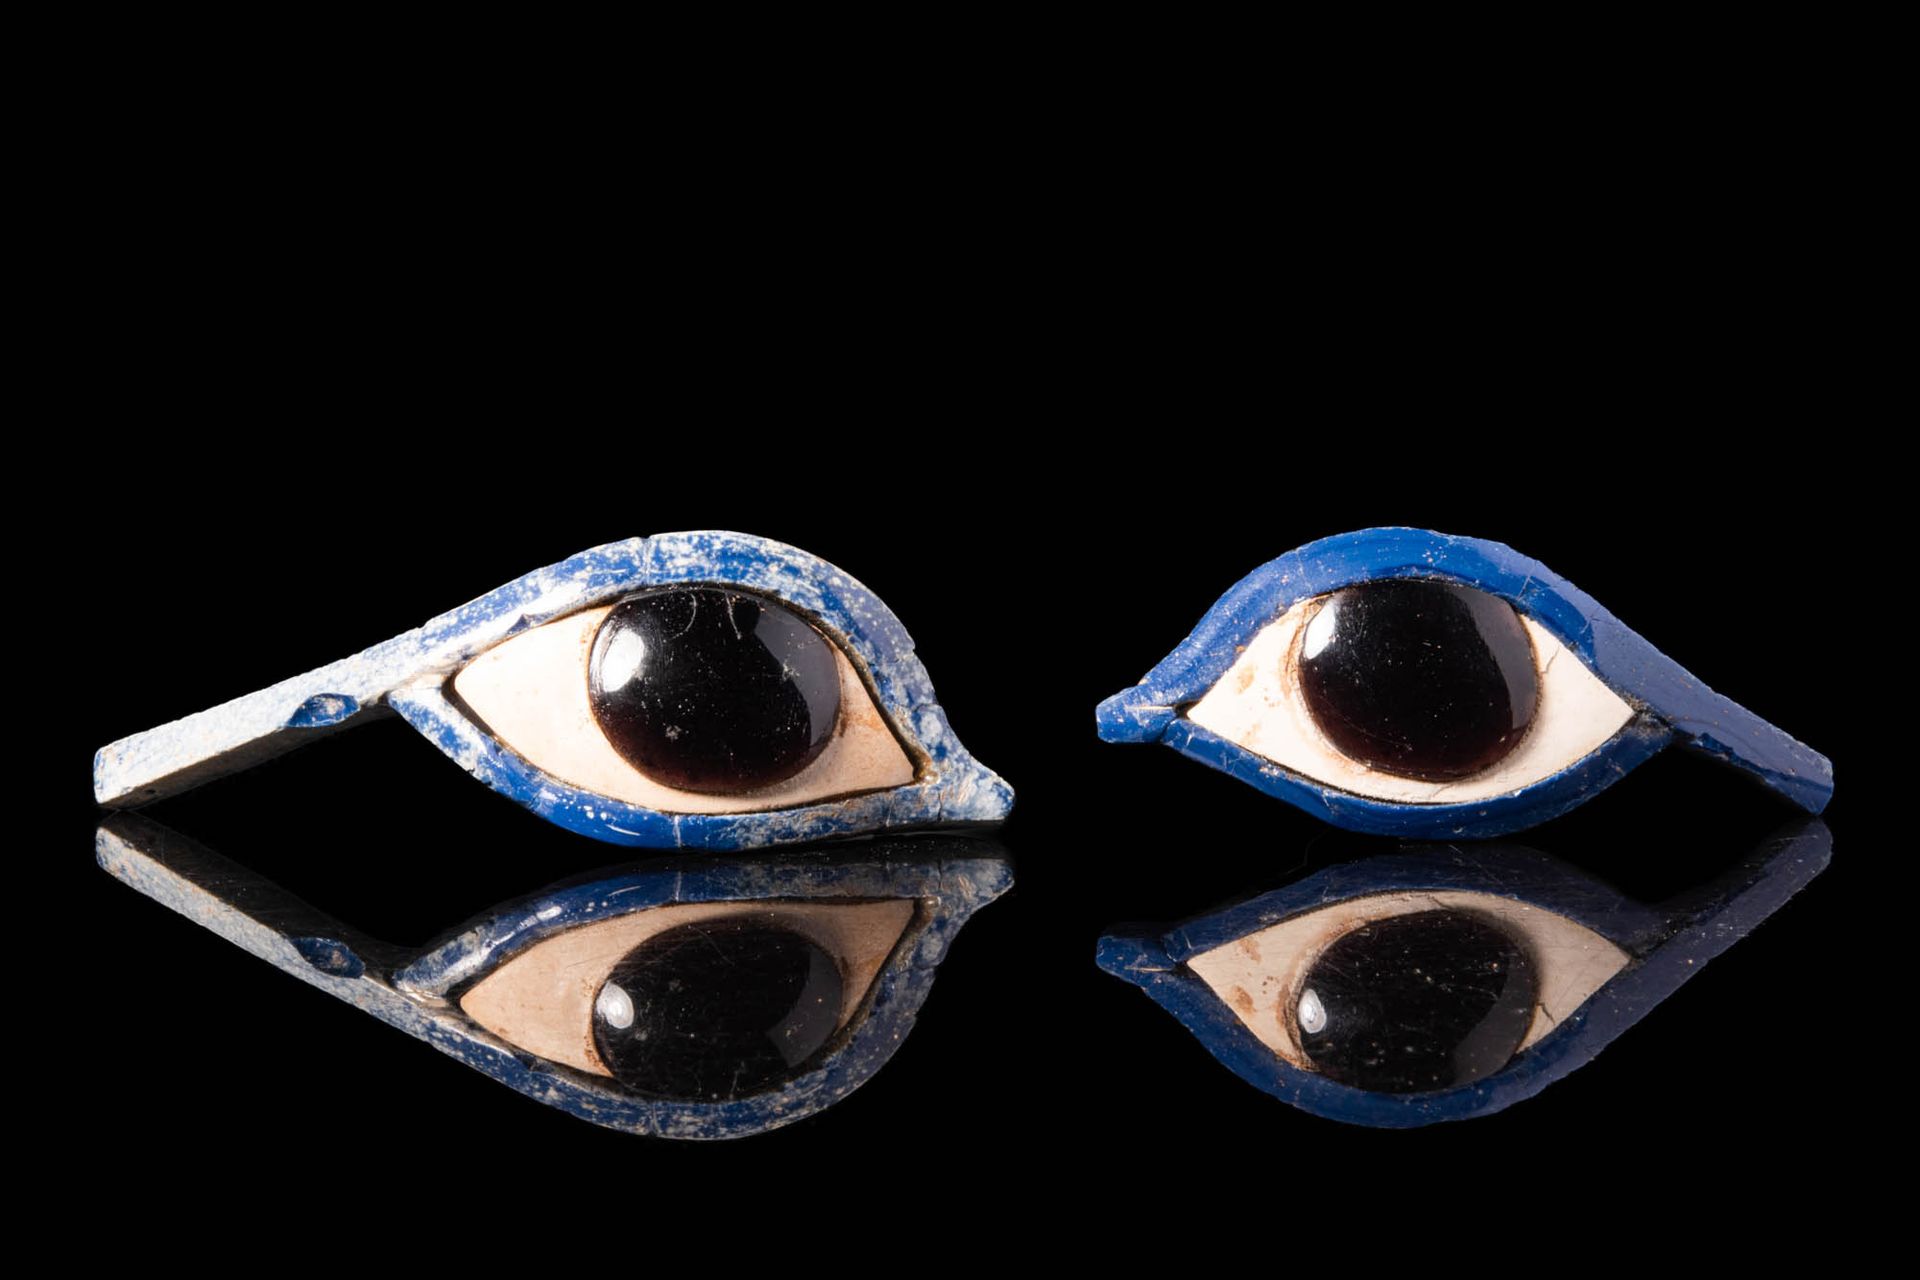 RARE EGYPTIAN GLASS AND OBSIDIAN EYES OF A MUMMY Späte bis ptolemäische Periode,&hellip;